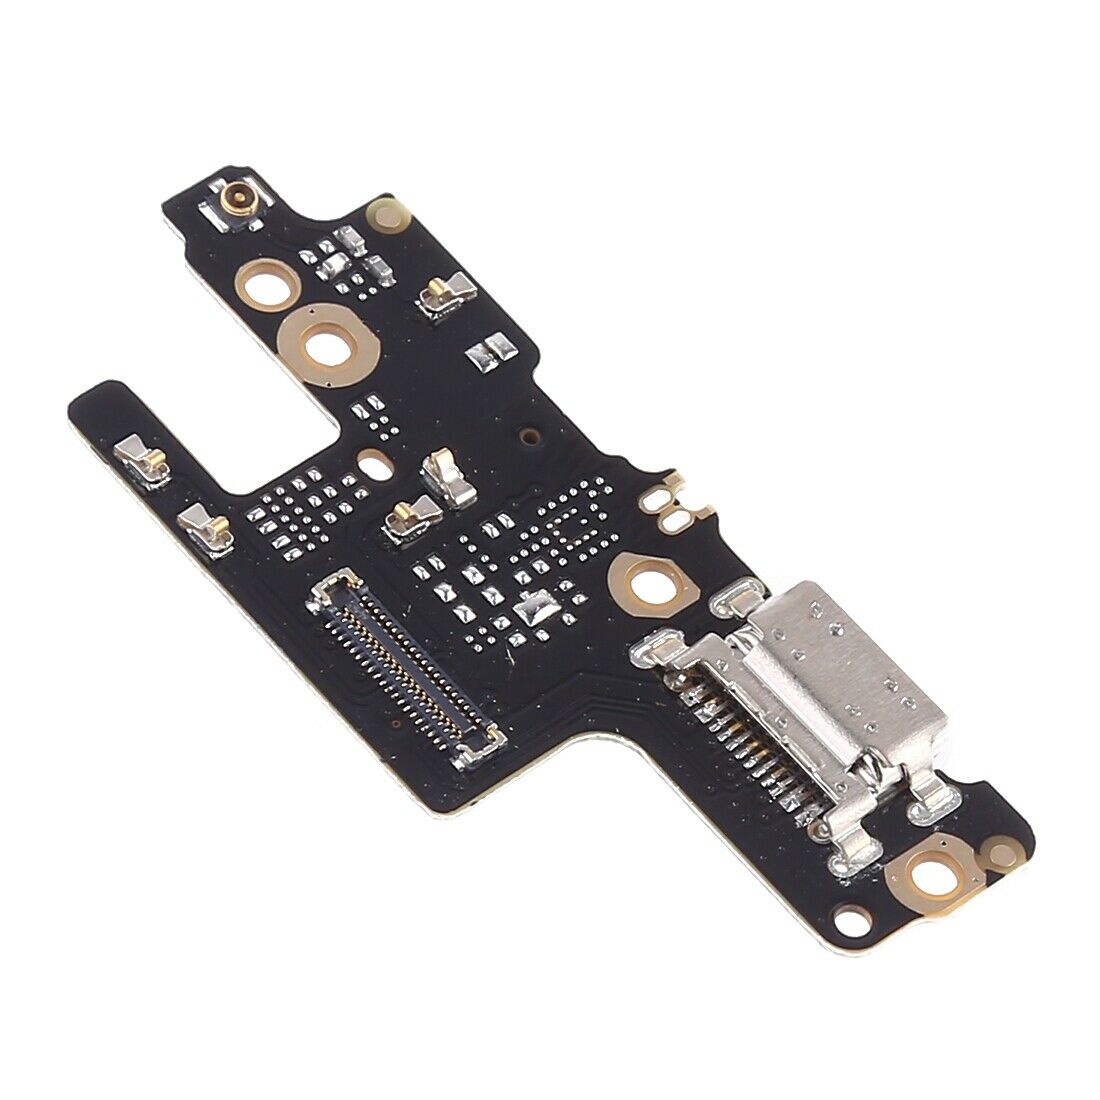 Xiaomi Redmi Note 7 Type-C Charging Port Board With Mic for [product_price] - First Help Tech